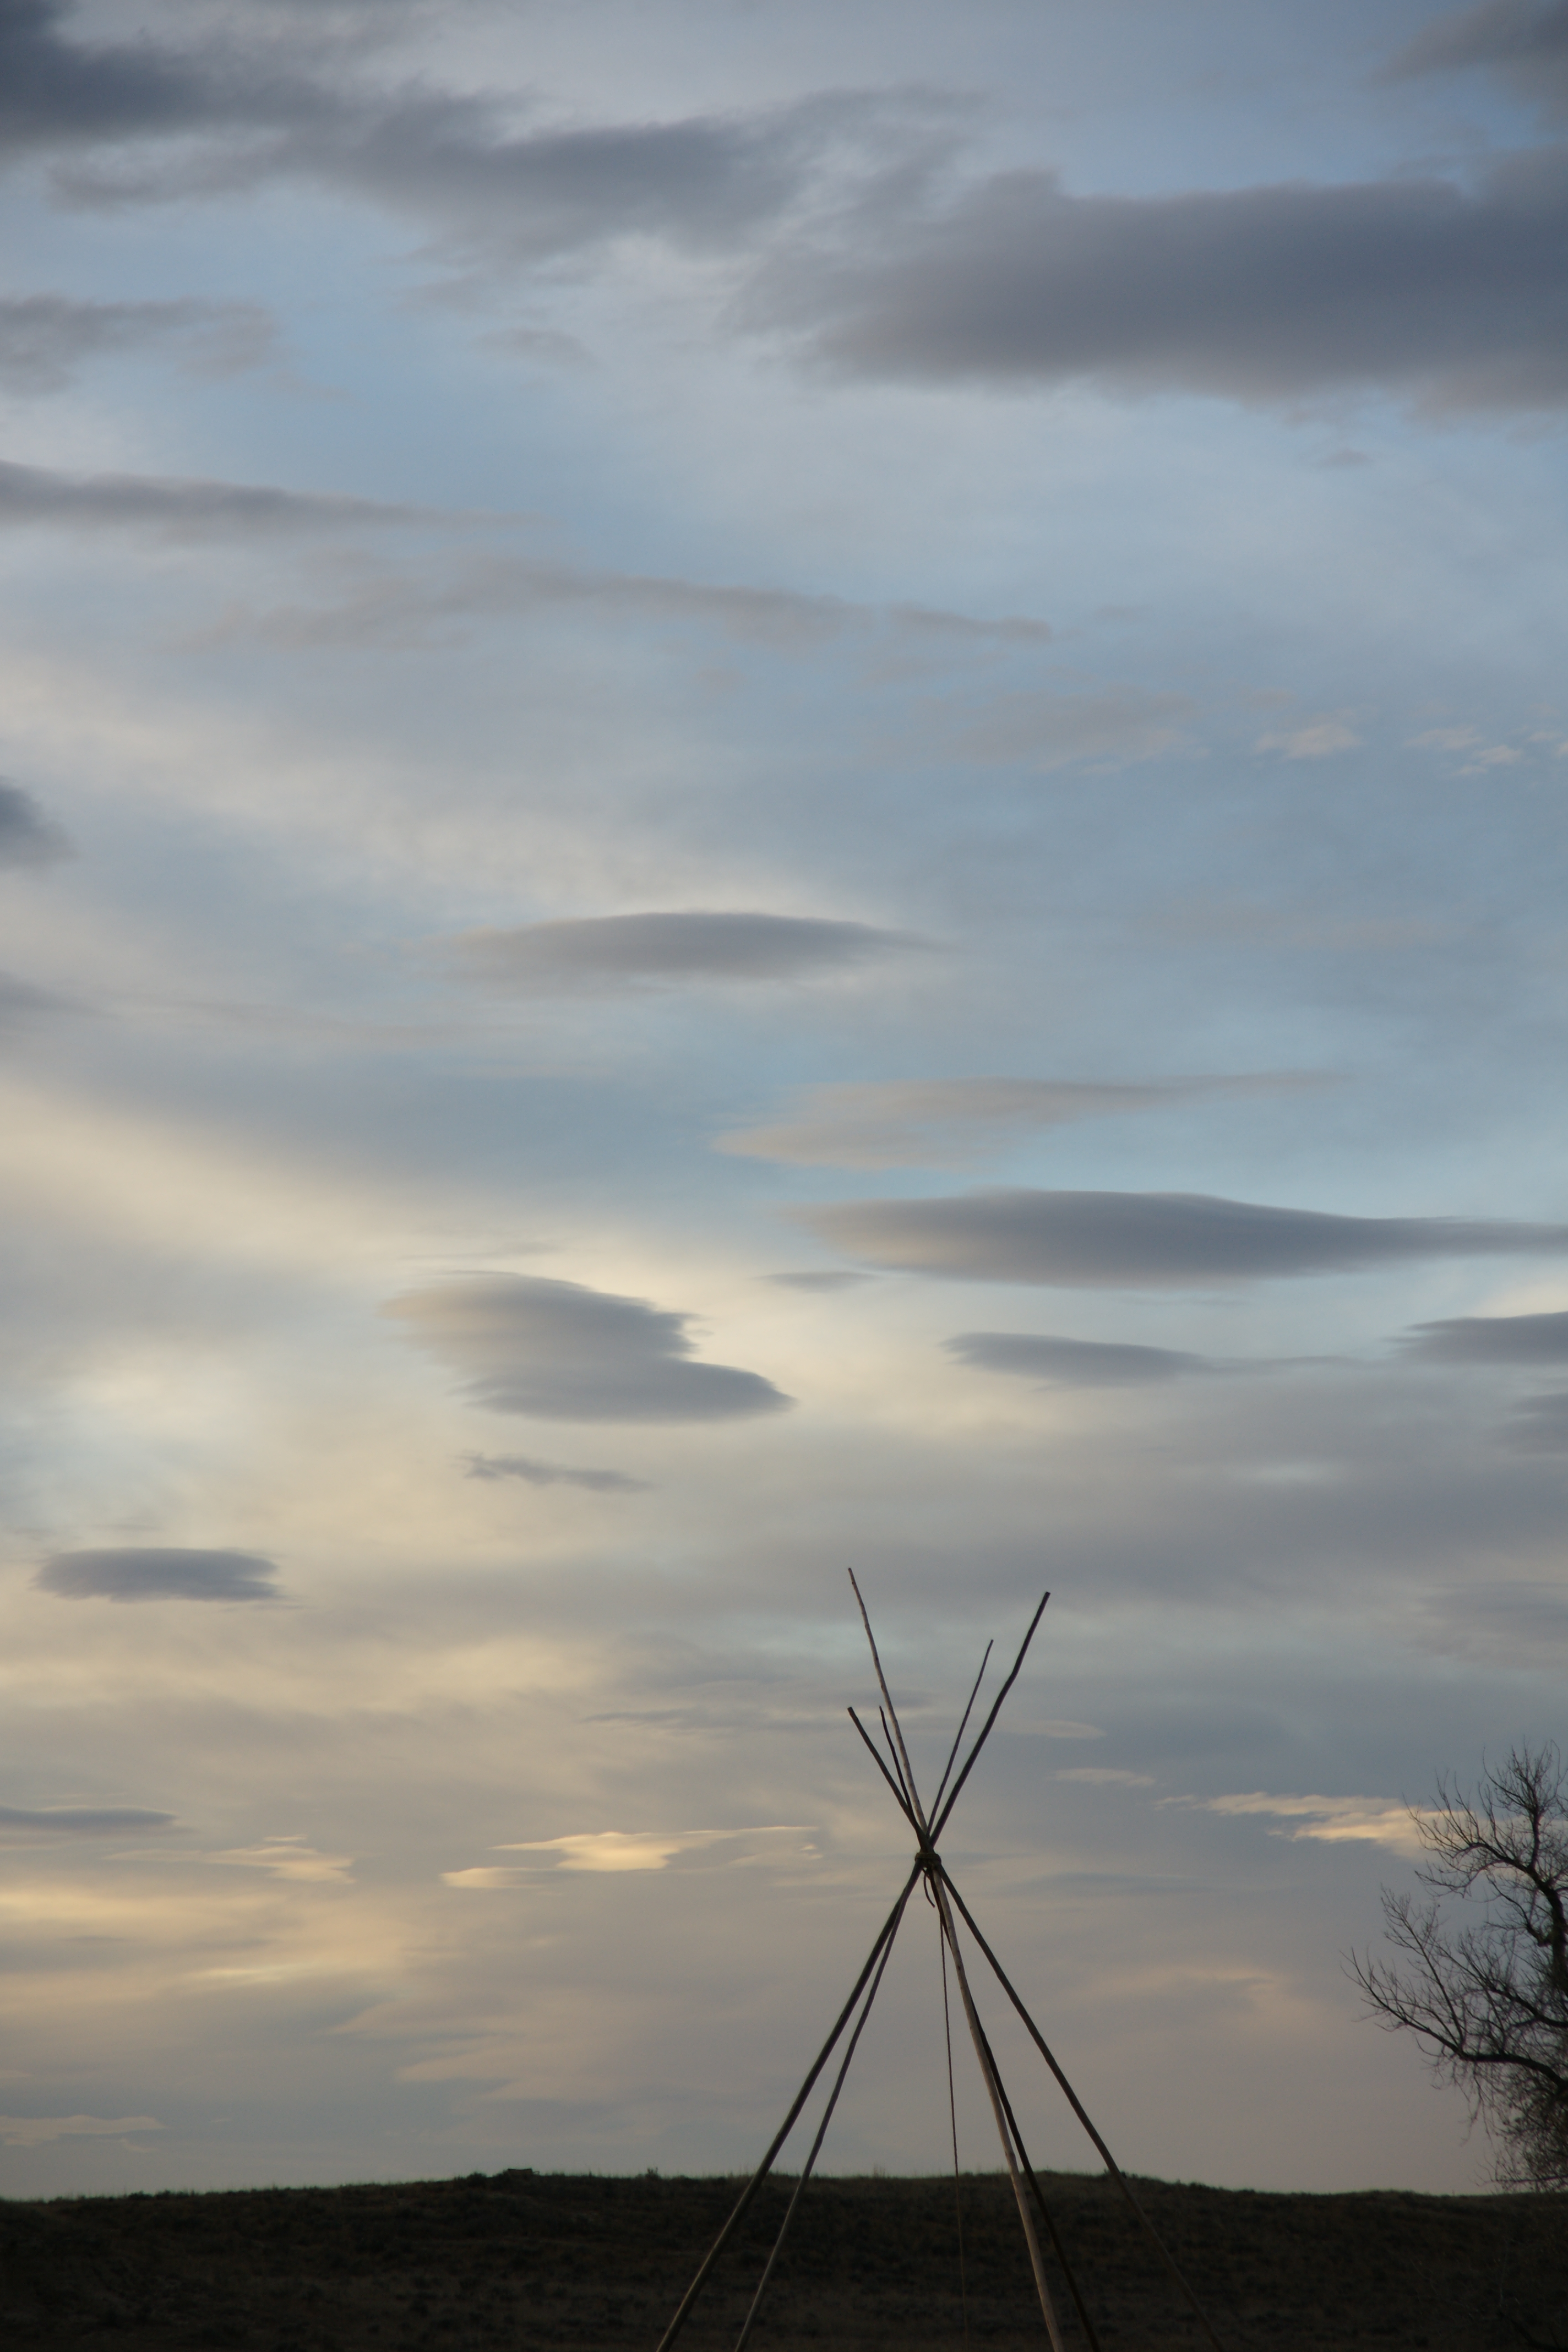 A tipi frame is silhouetted by the evening sky.